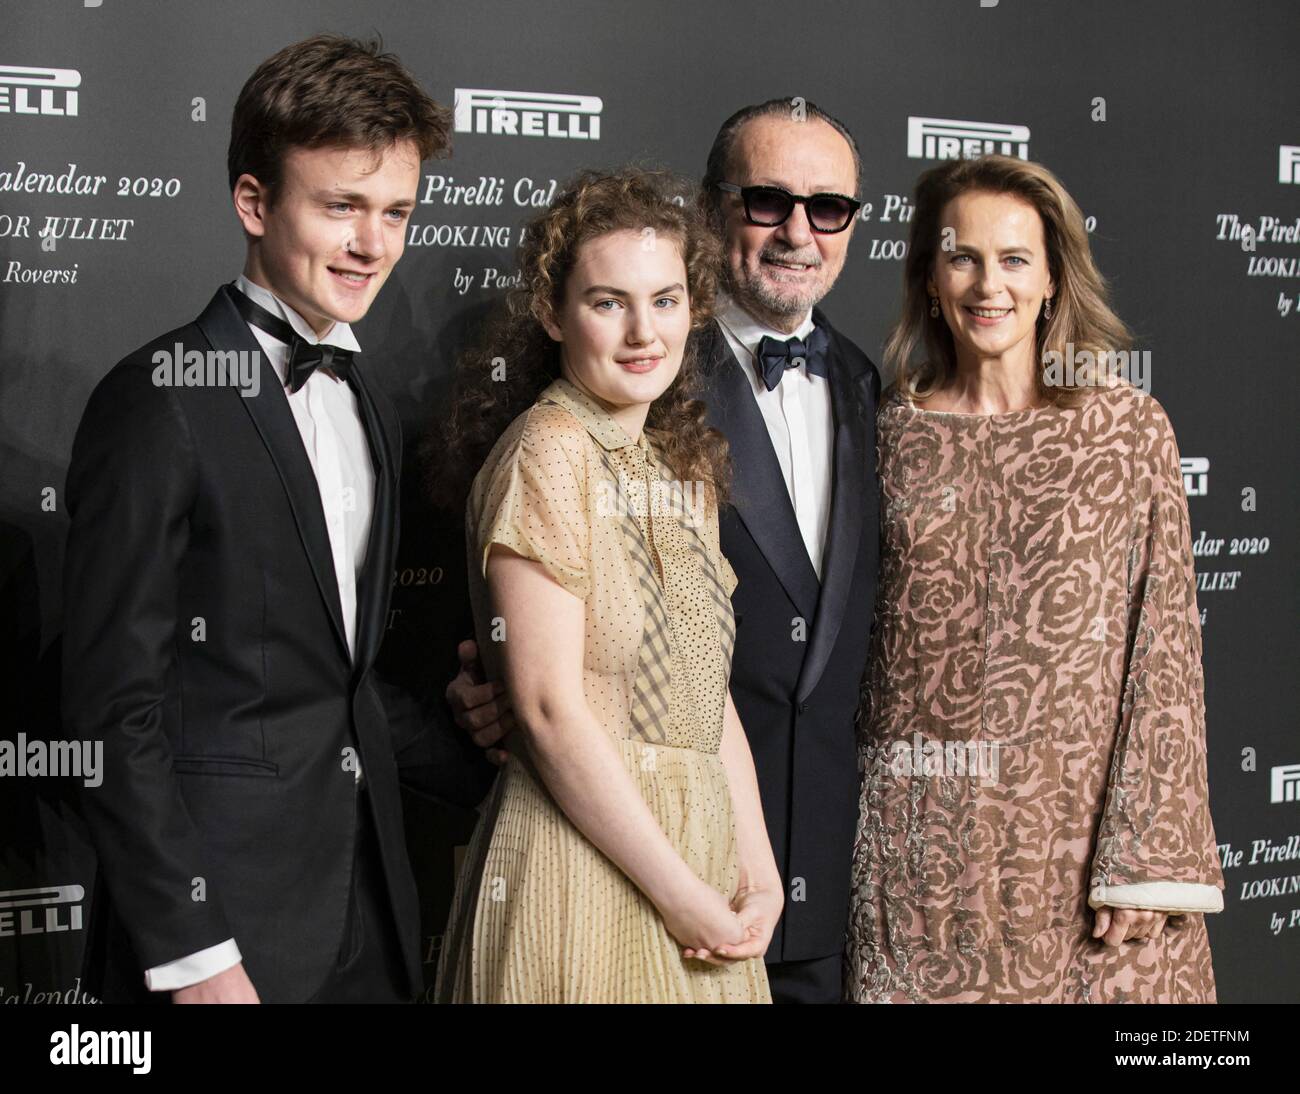 Stella Roversi, Paolo Roversi and his wife attend the presentation of the  Pirelli 2020 Calendar Looking For Juliet at Teatro Filarmonico on December  3, 2019 in Verona, Italy. Photo by Marco Piovanotto/ABACAPRESS.COM